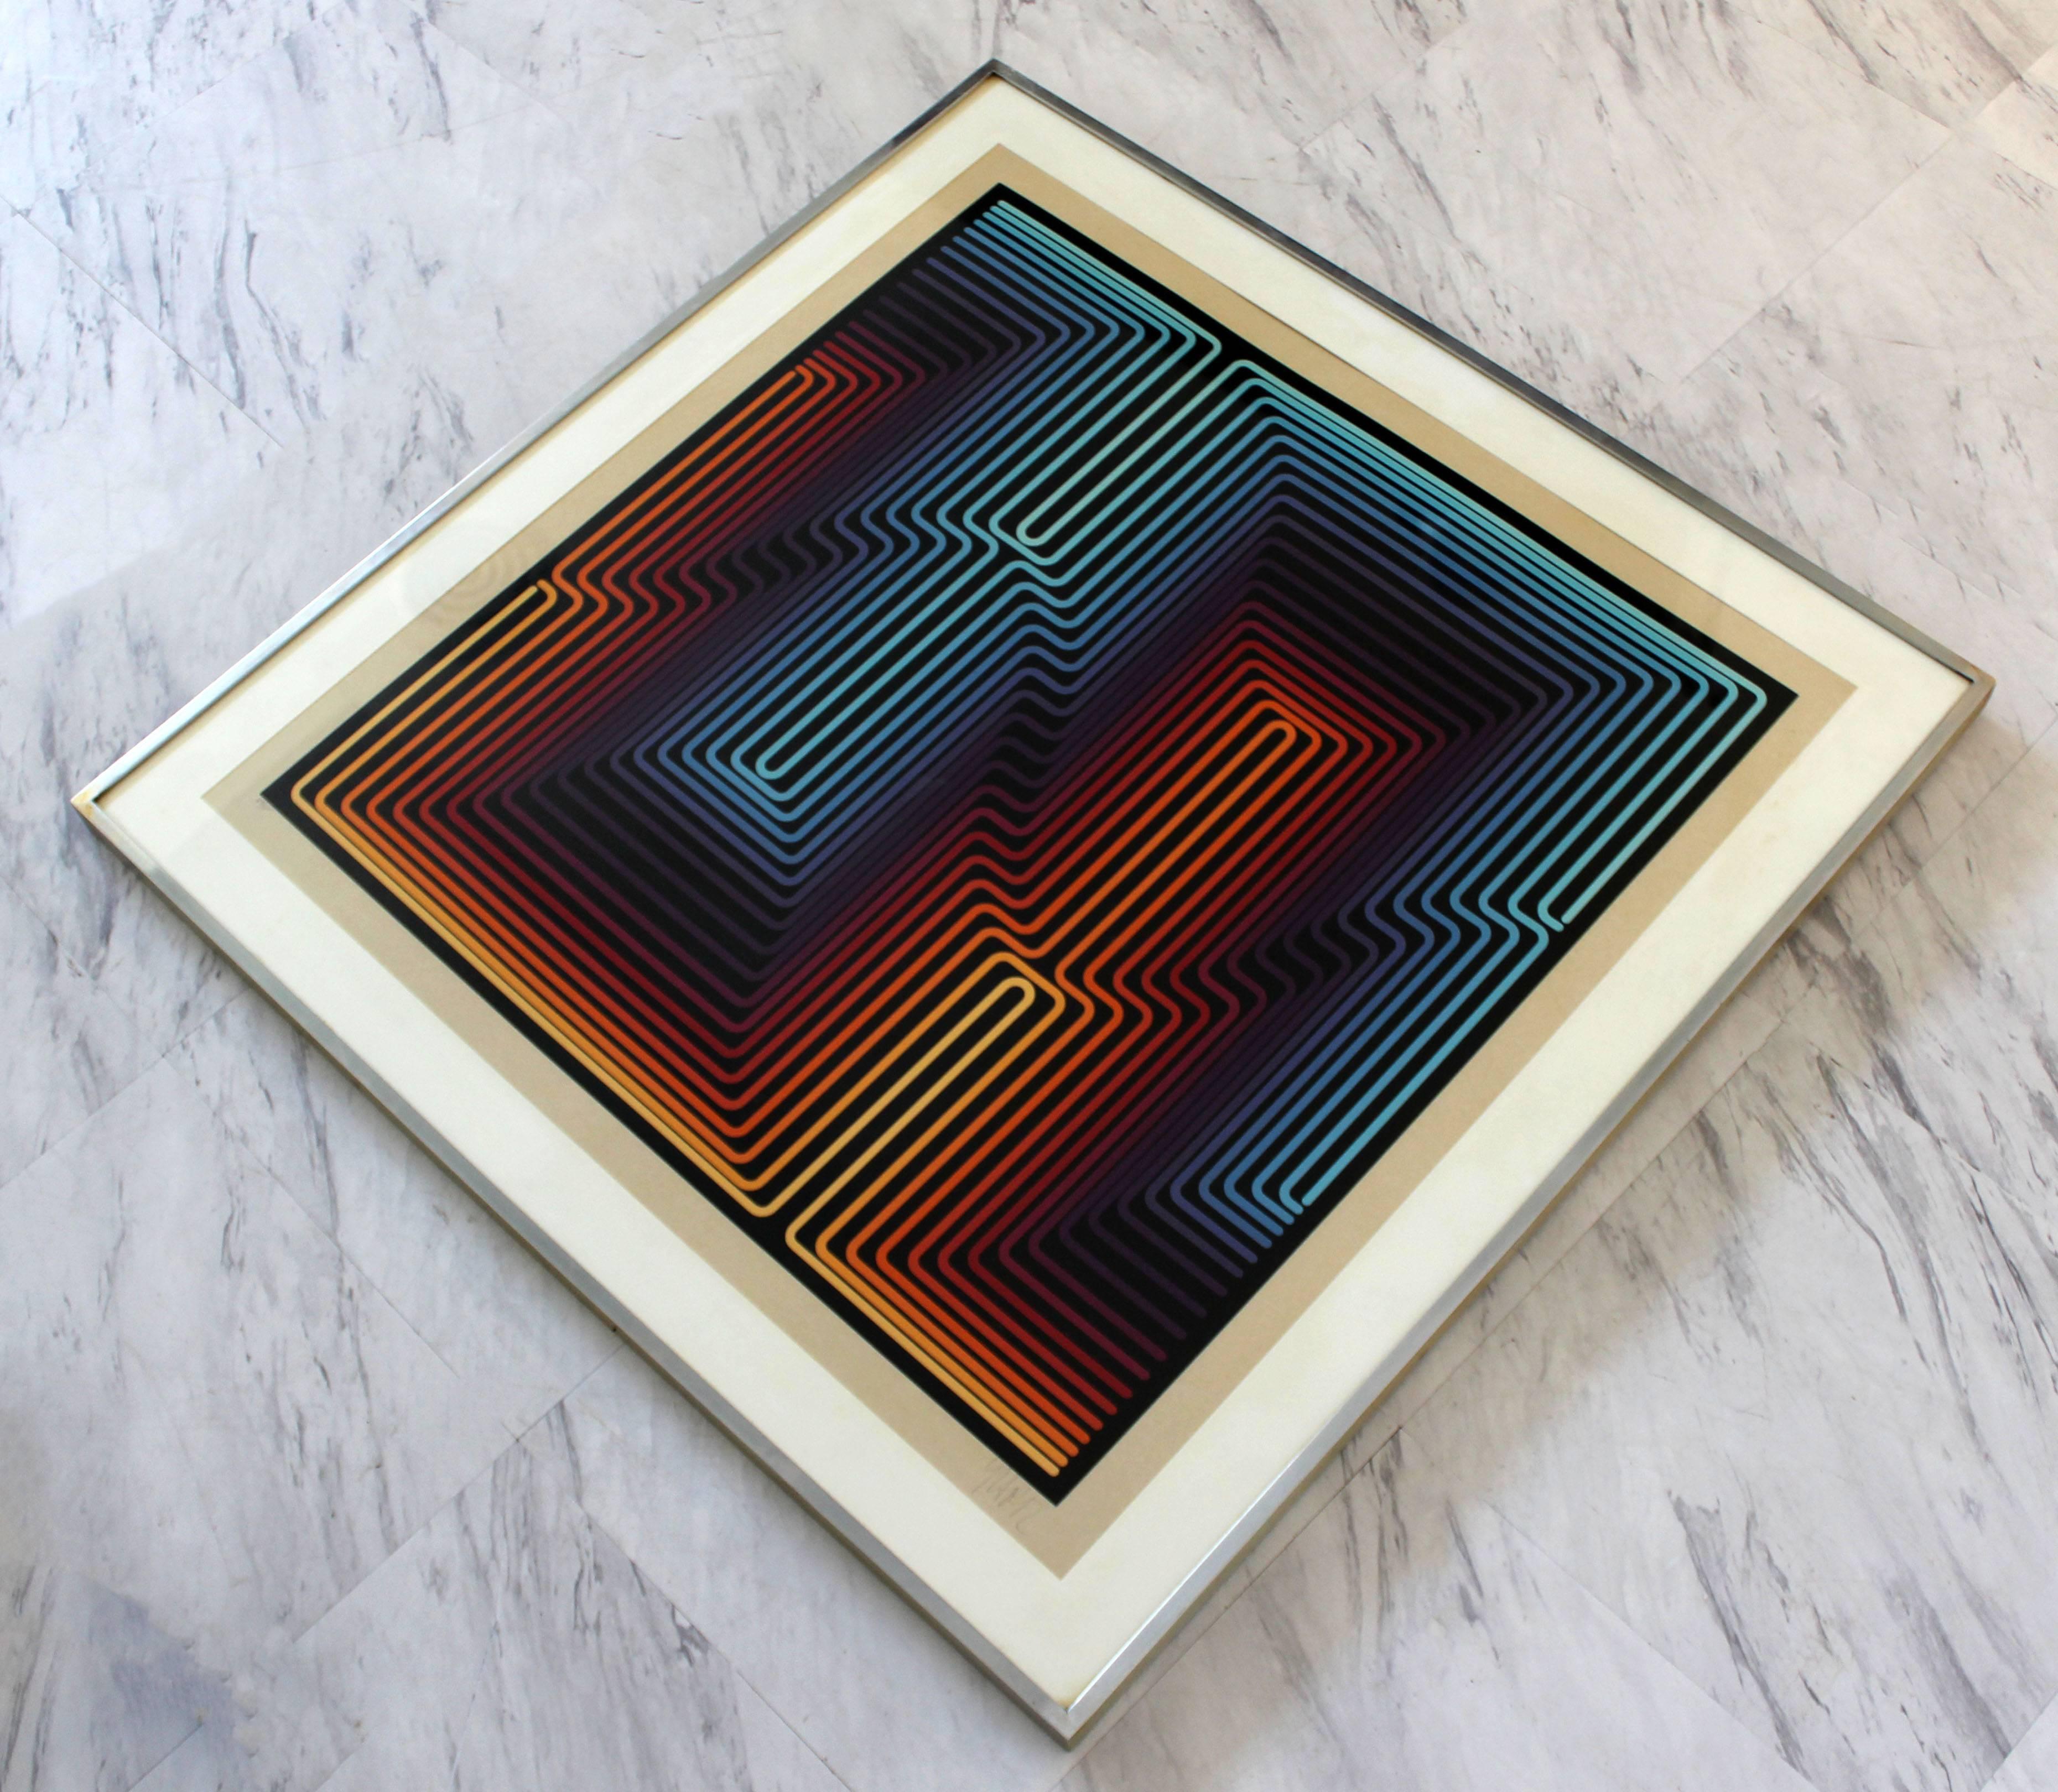 Late 20th Century Mid-Century Modern Op Art Print Signed Yvaral Vasarely Numbered 69/200